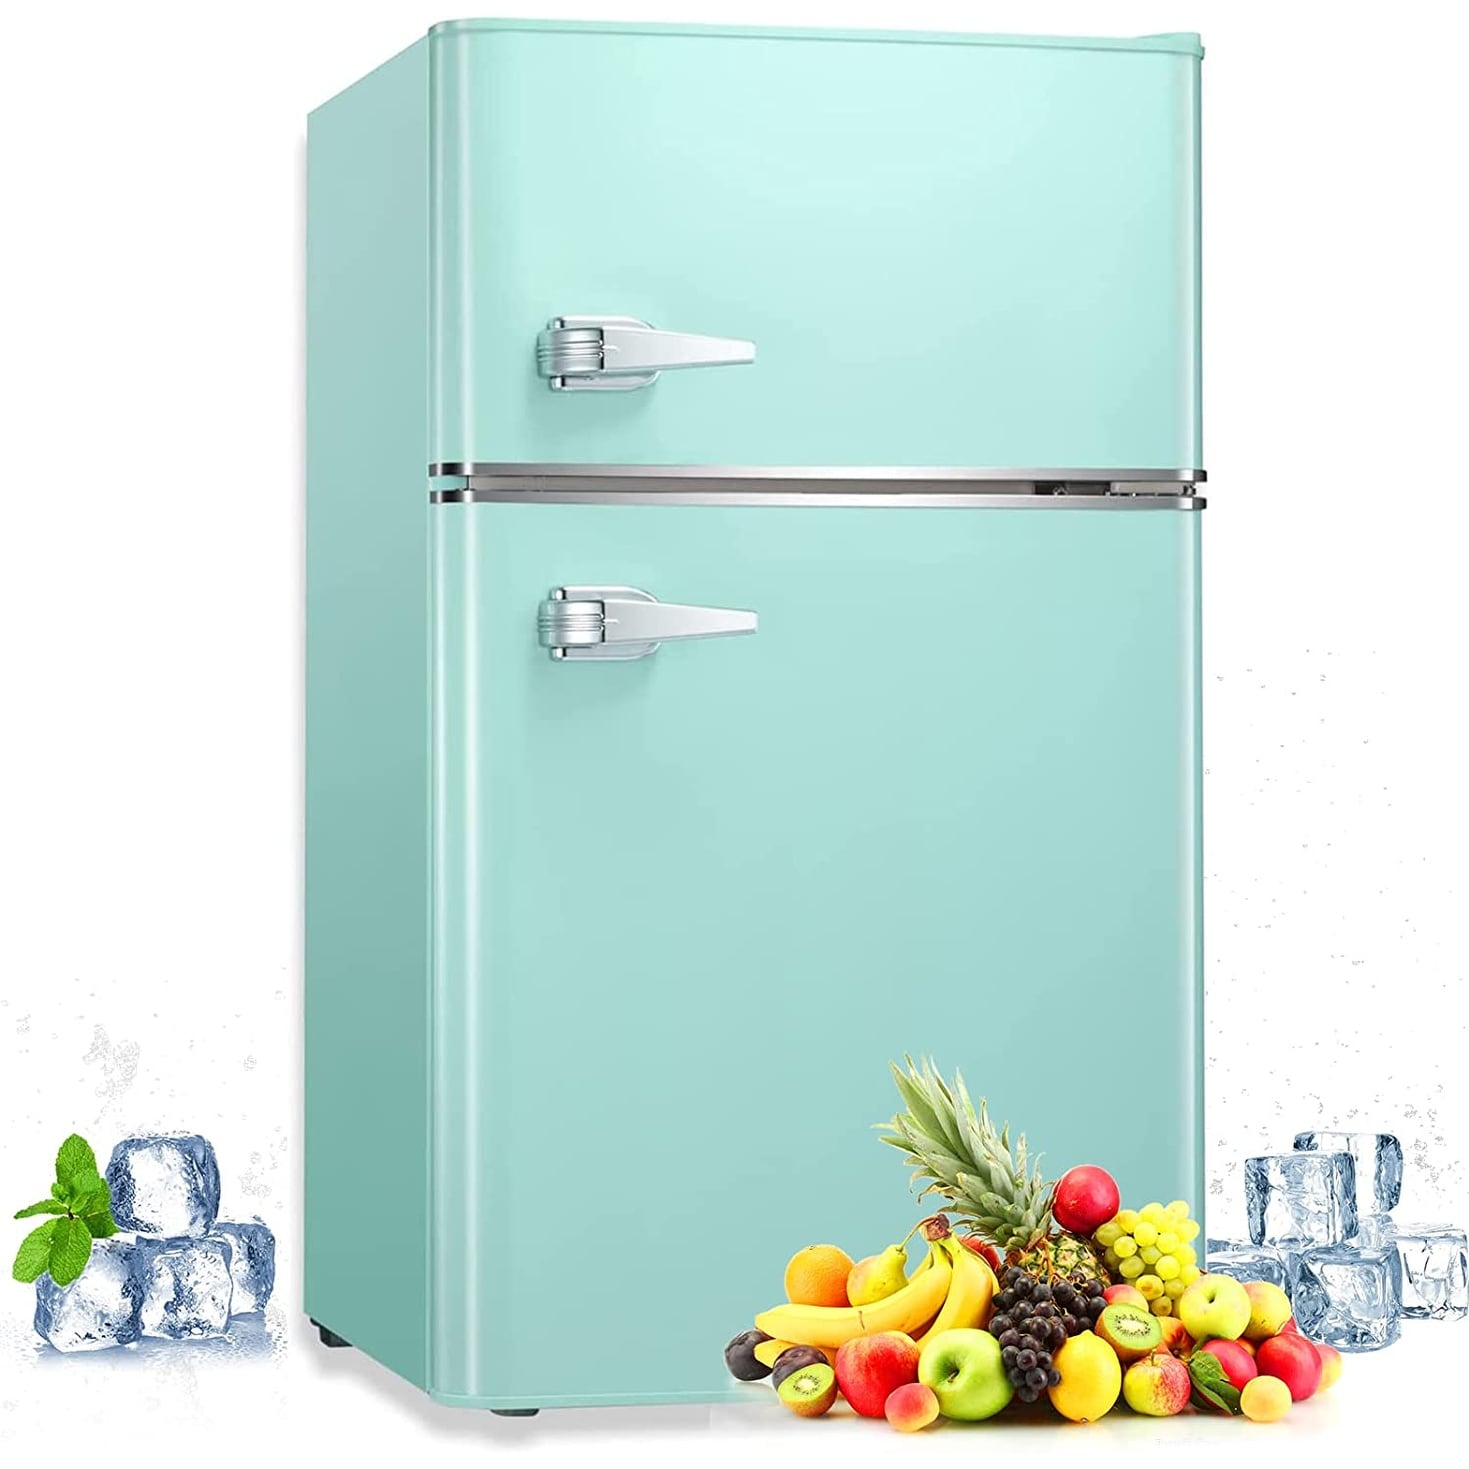 https://ak1.ostkcdn.com/images/products/is/images/direct/02f9c27287857b6e5dd2dbf3d3c92d291236b6f6/3.2-CU-FT-Compact-Mini-Refrigerator-Separate-Freezer%2C-Small-Fridge.jpg